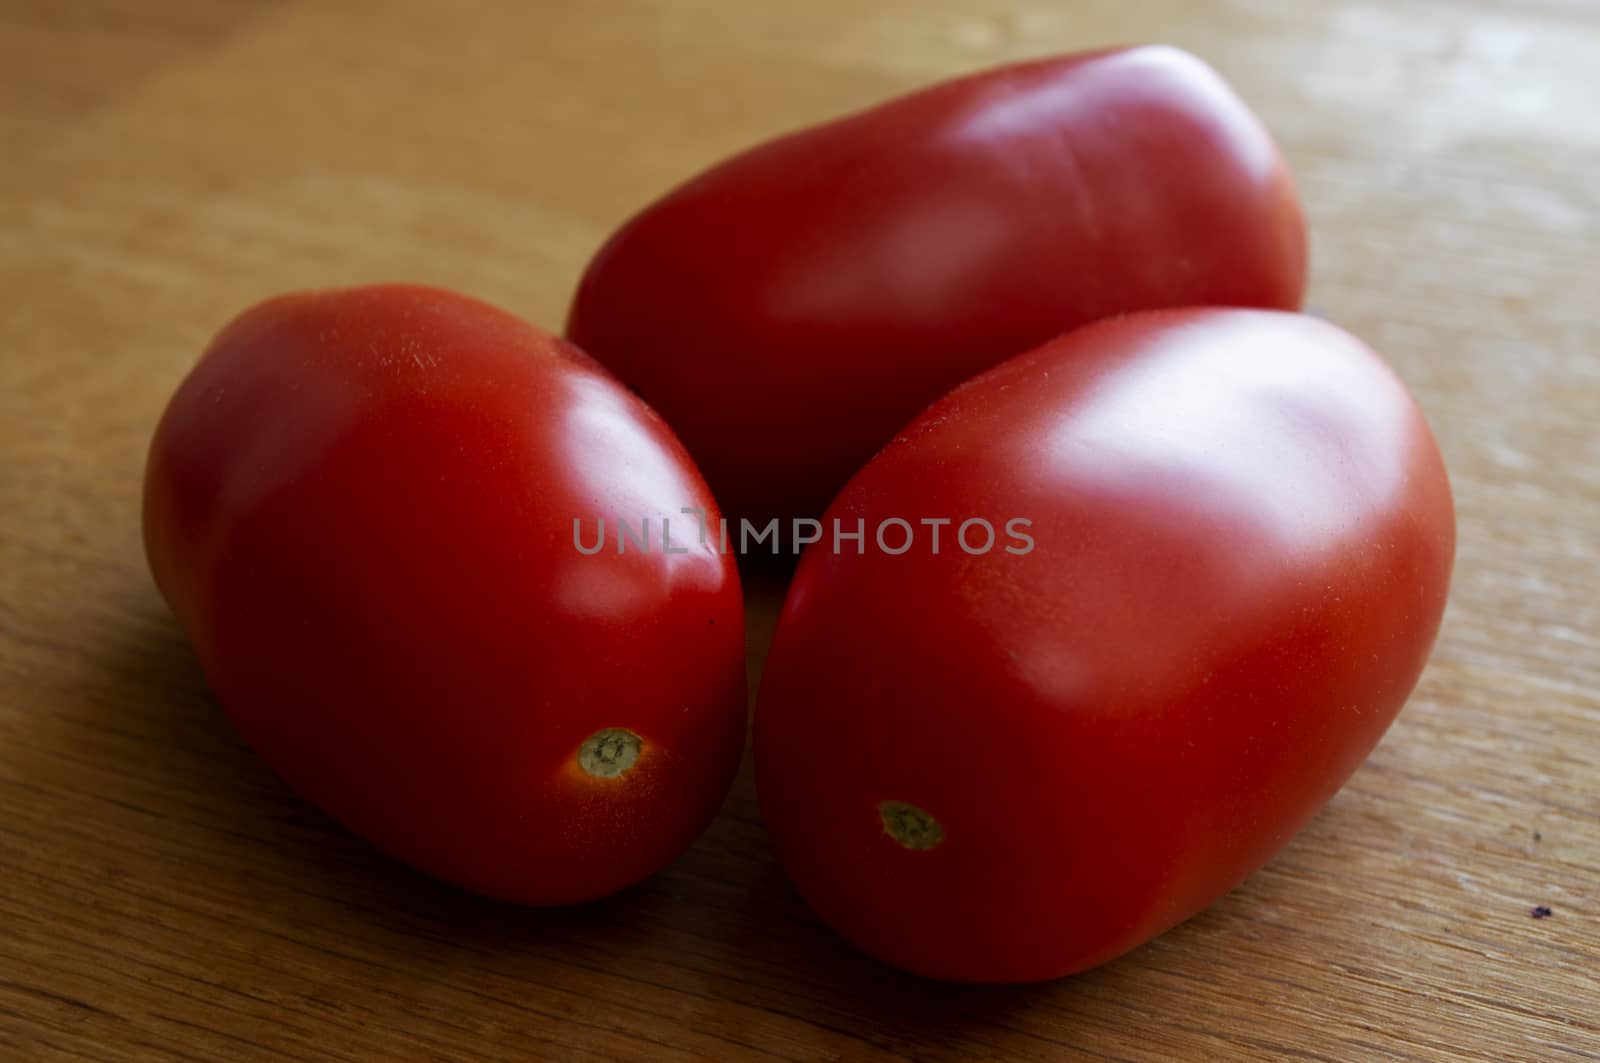 Three red tomatoes on wood table in sunlight.